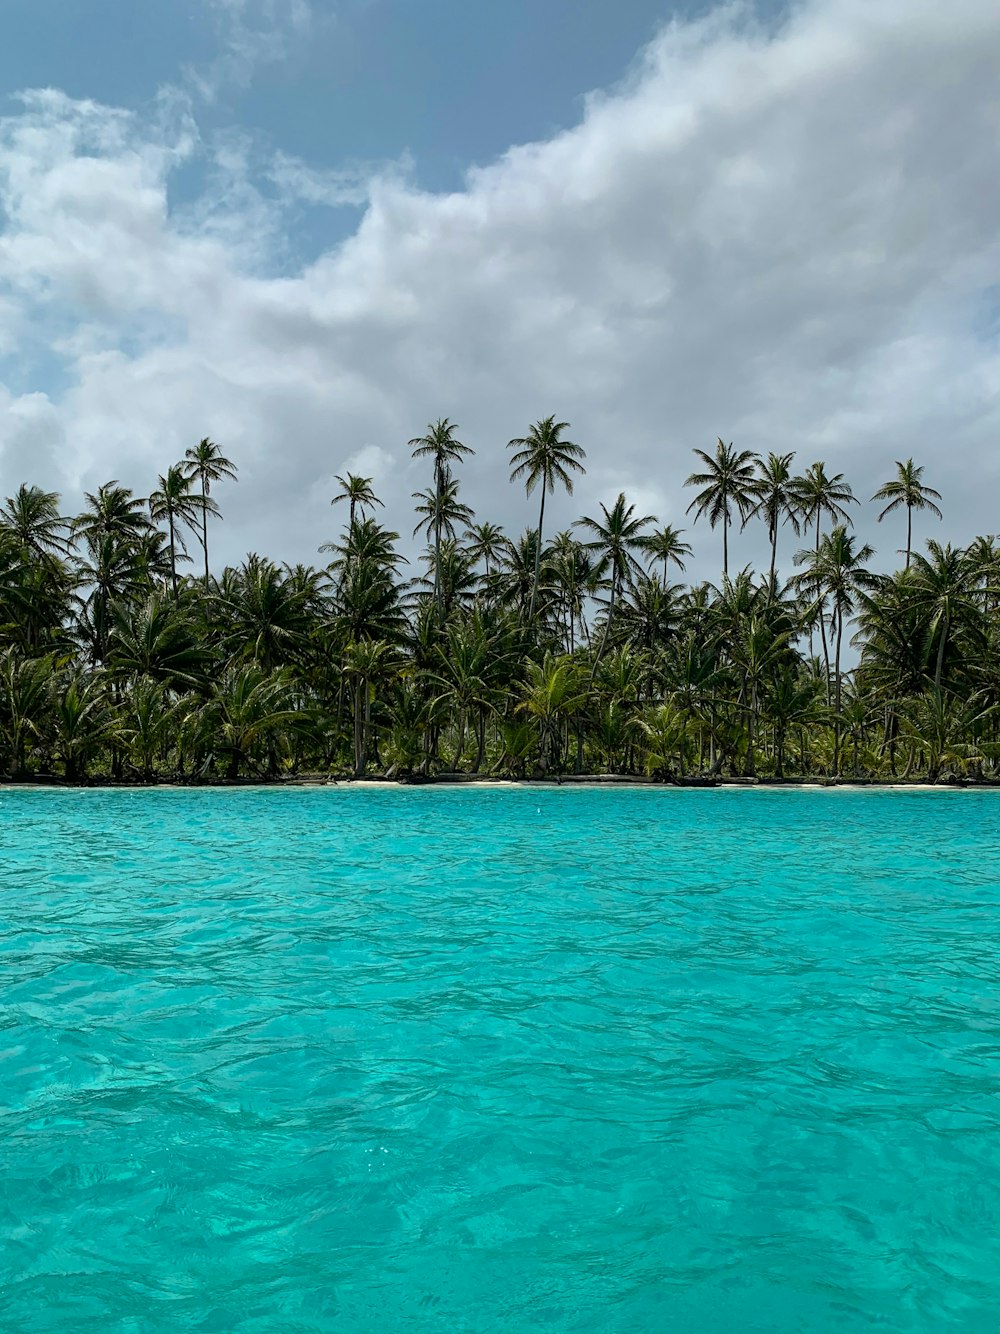 palm trees on blue sea under white clouds and blue sky during daytime